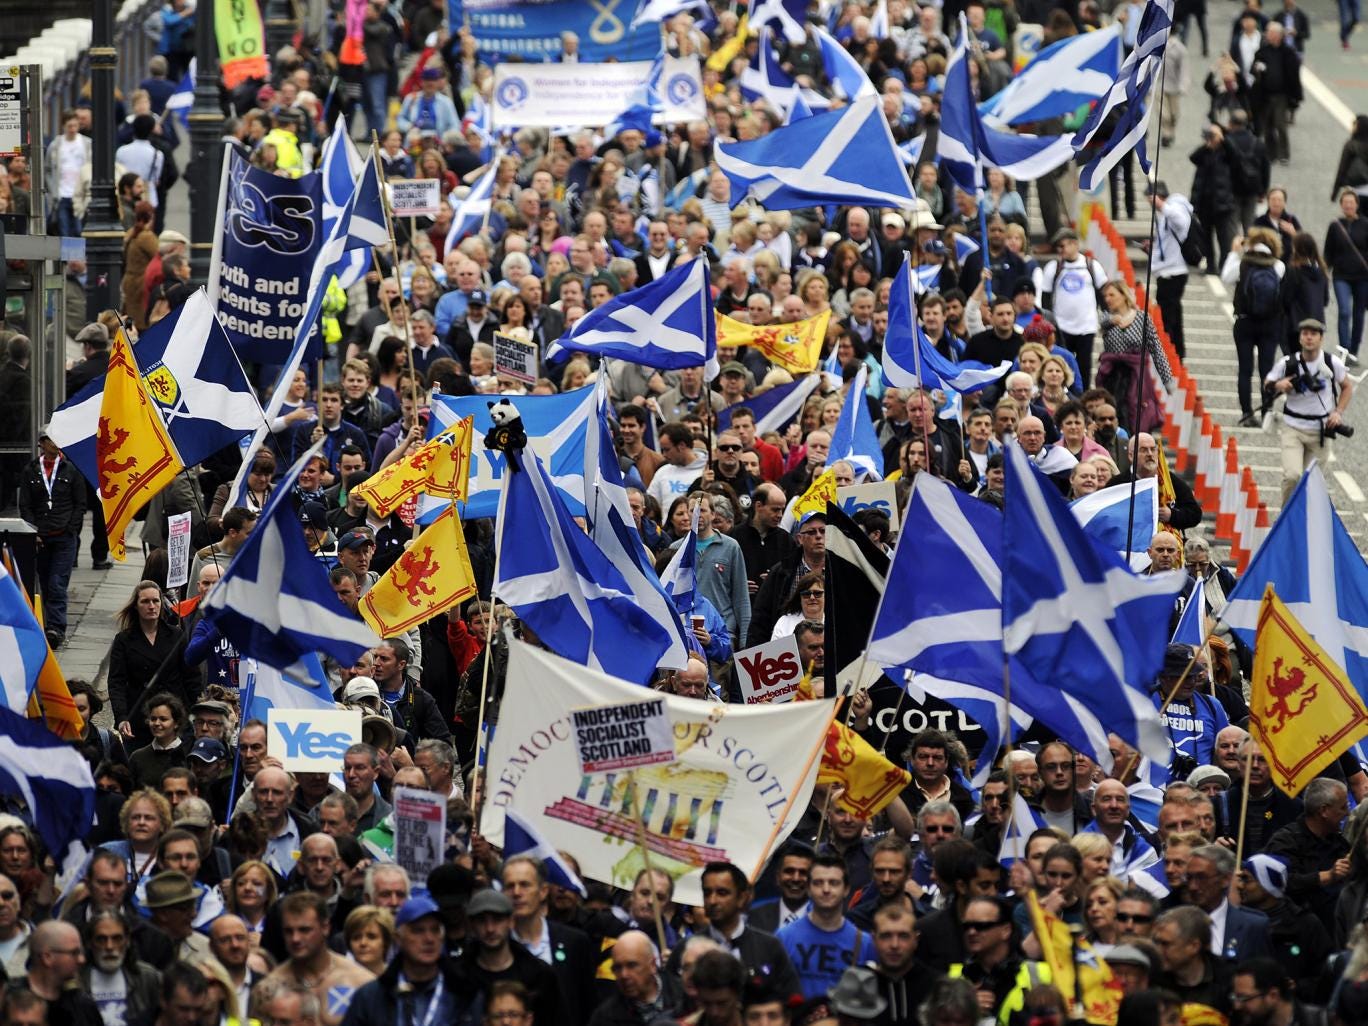 Supporters of a Yes vote in the Scottish independence referendum in Edinburgh in September 2013.